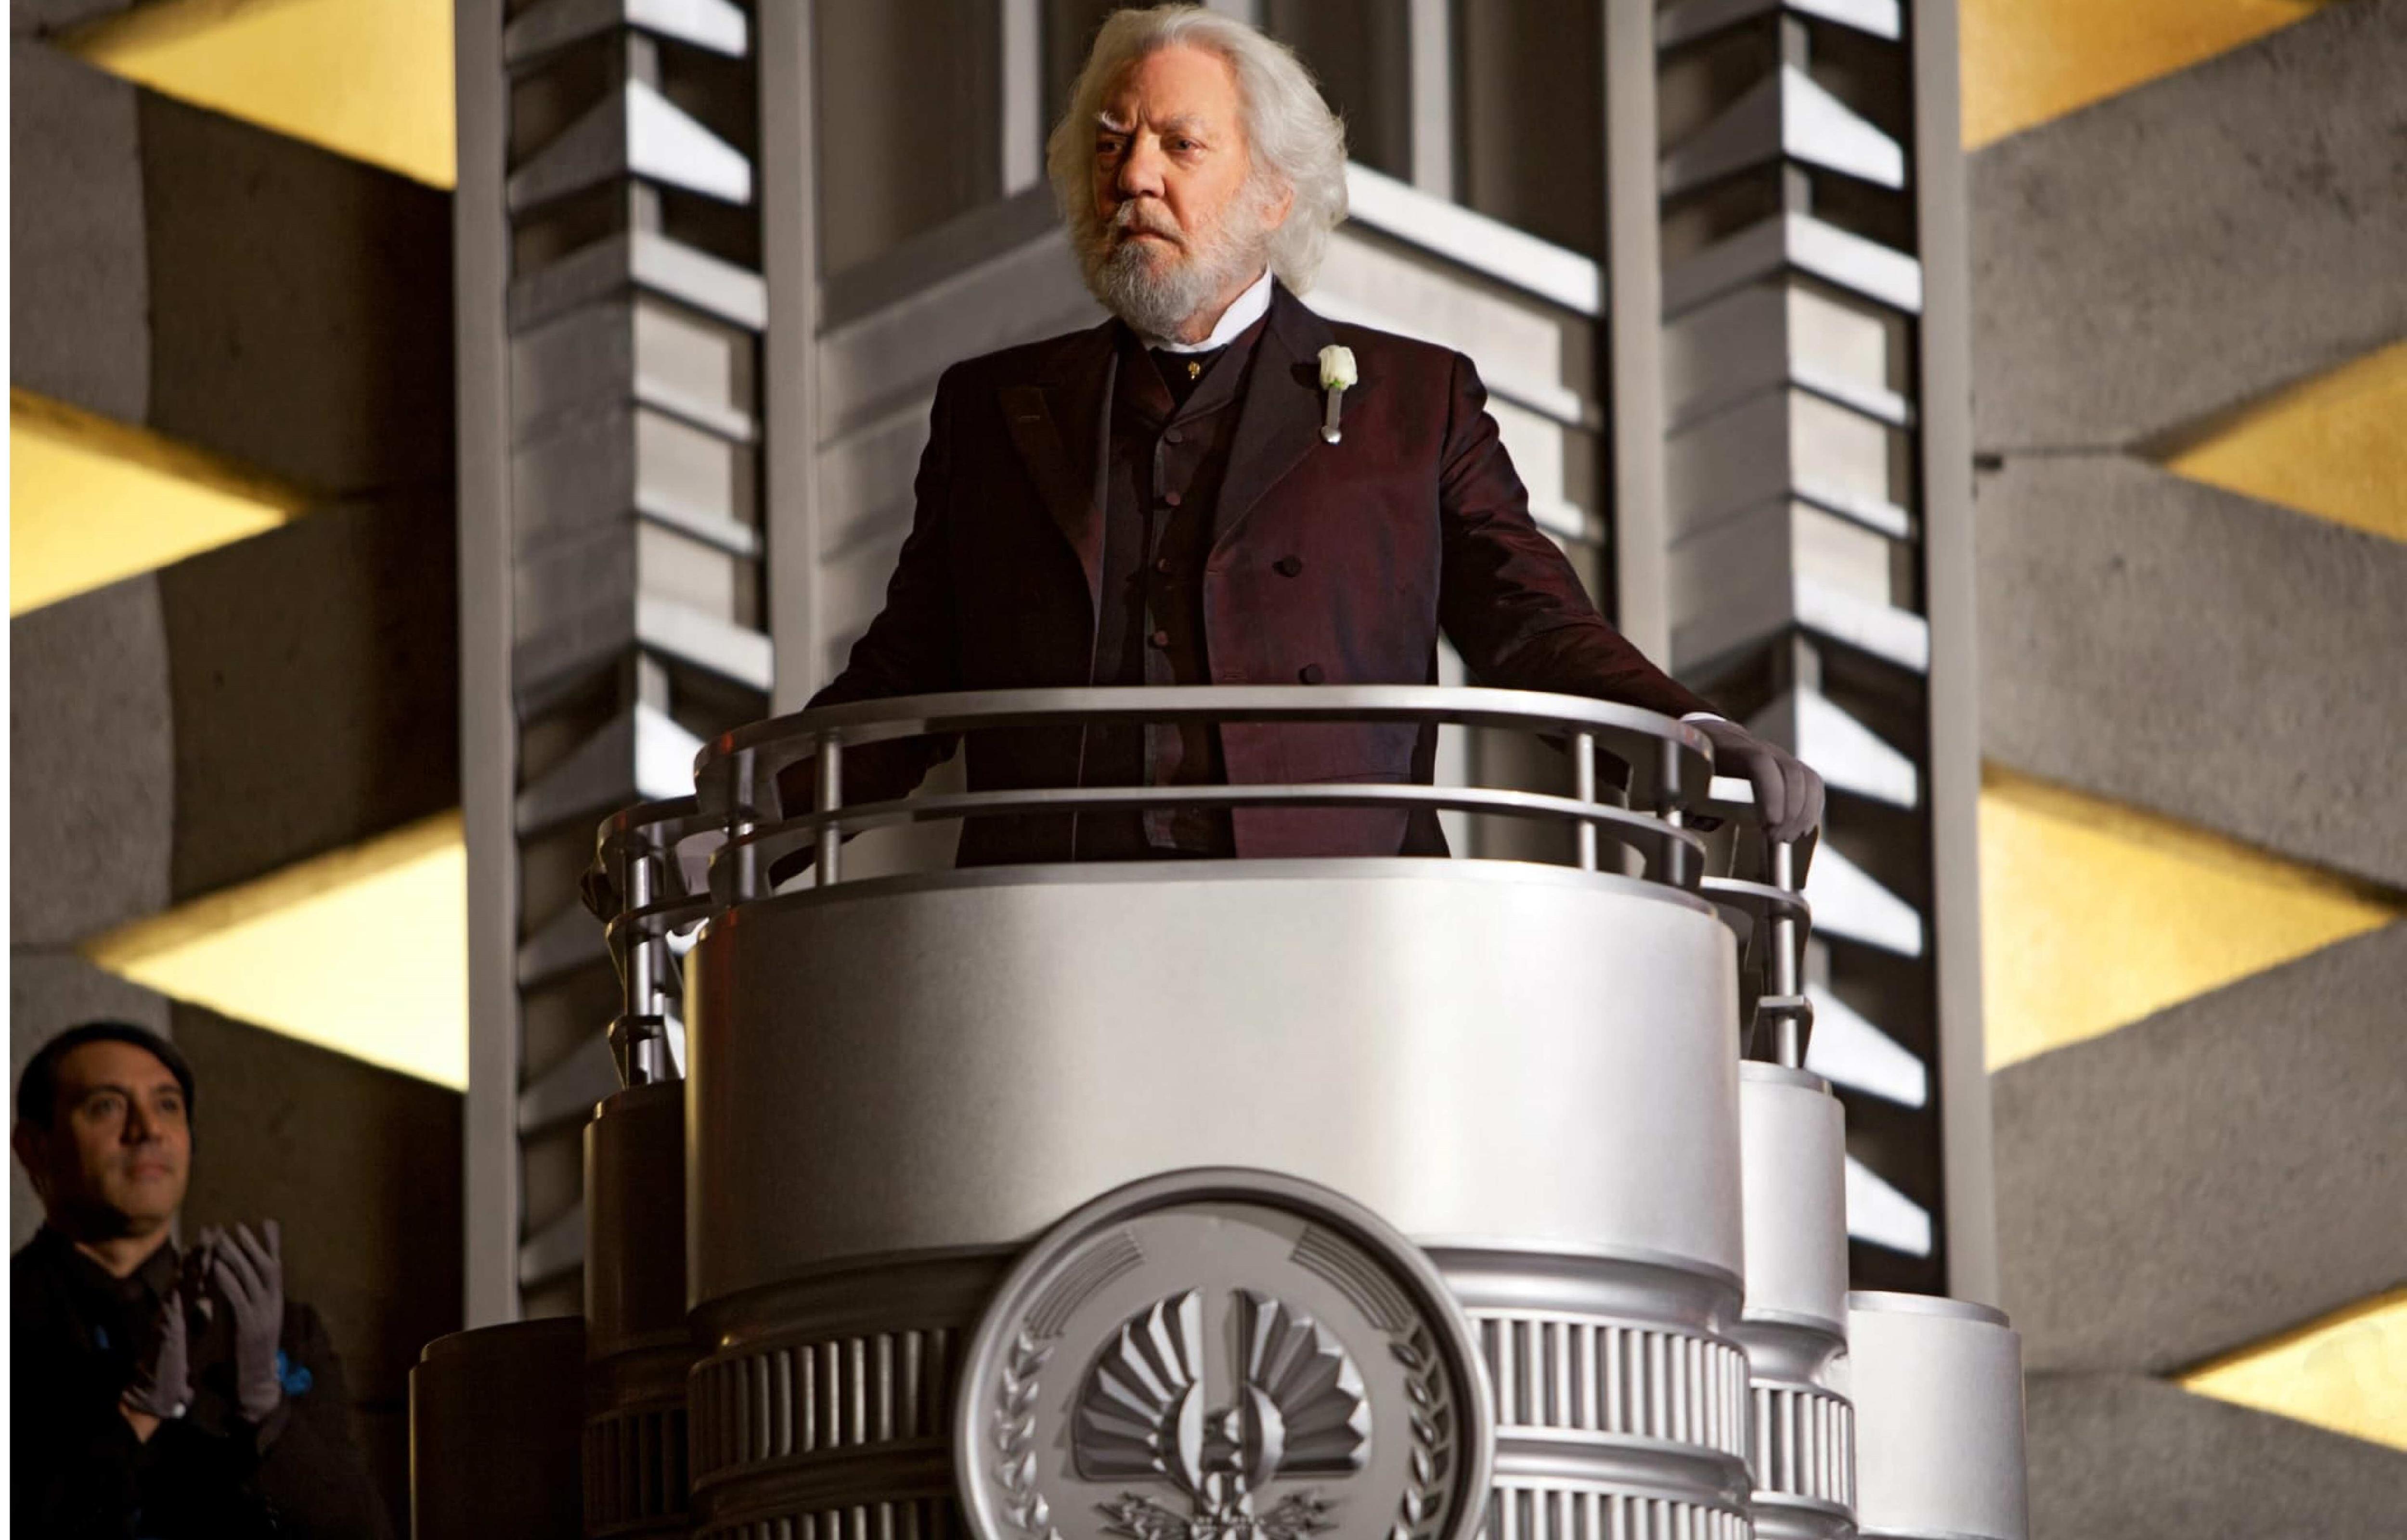 Donald Sutherland as President Snow standing and addressing the people